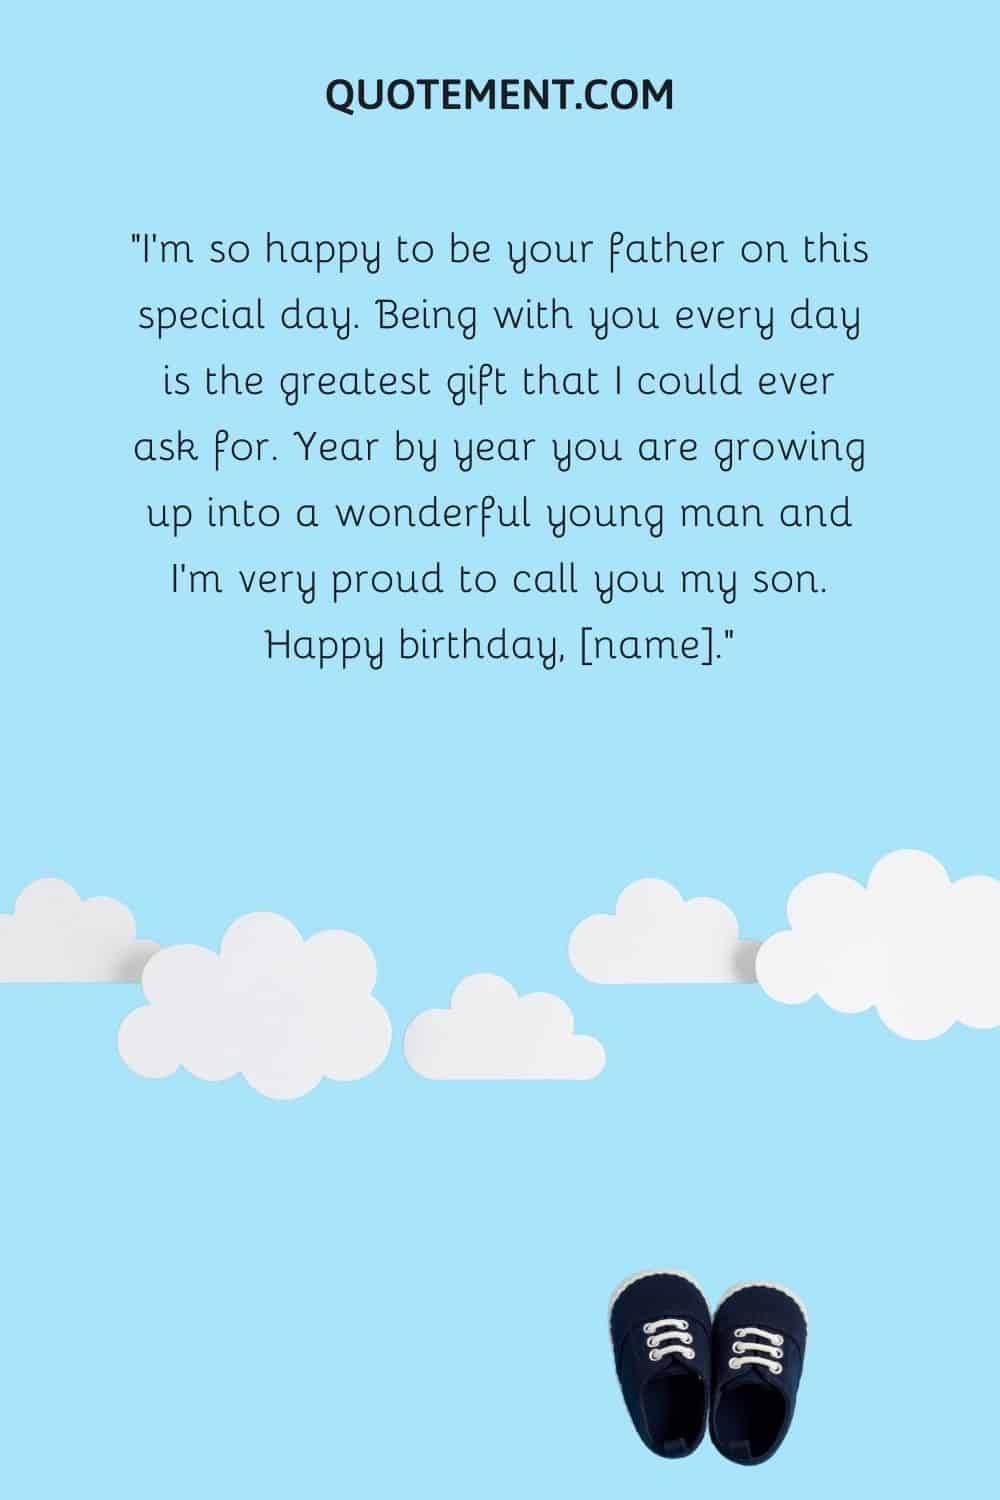 I'm so happy to be your father on this special day